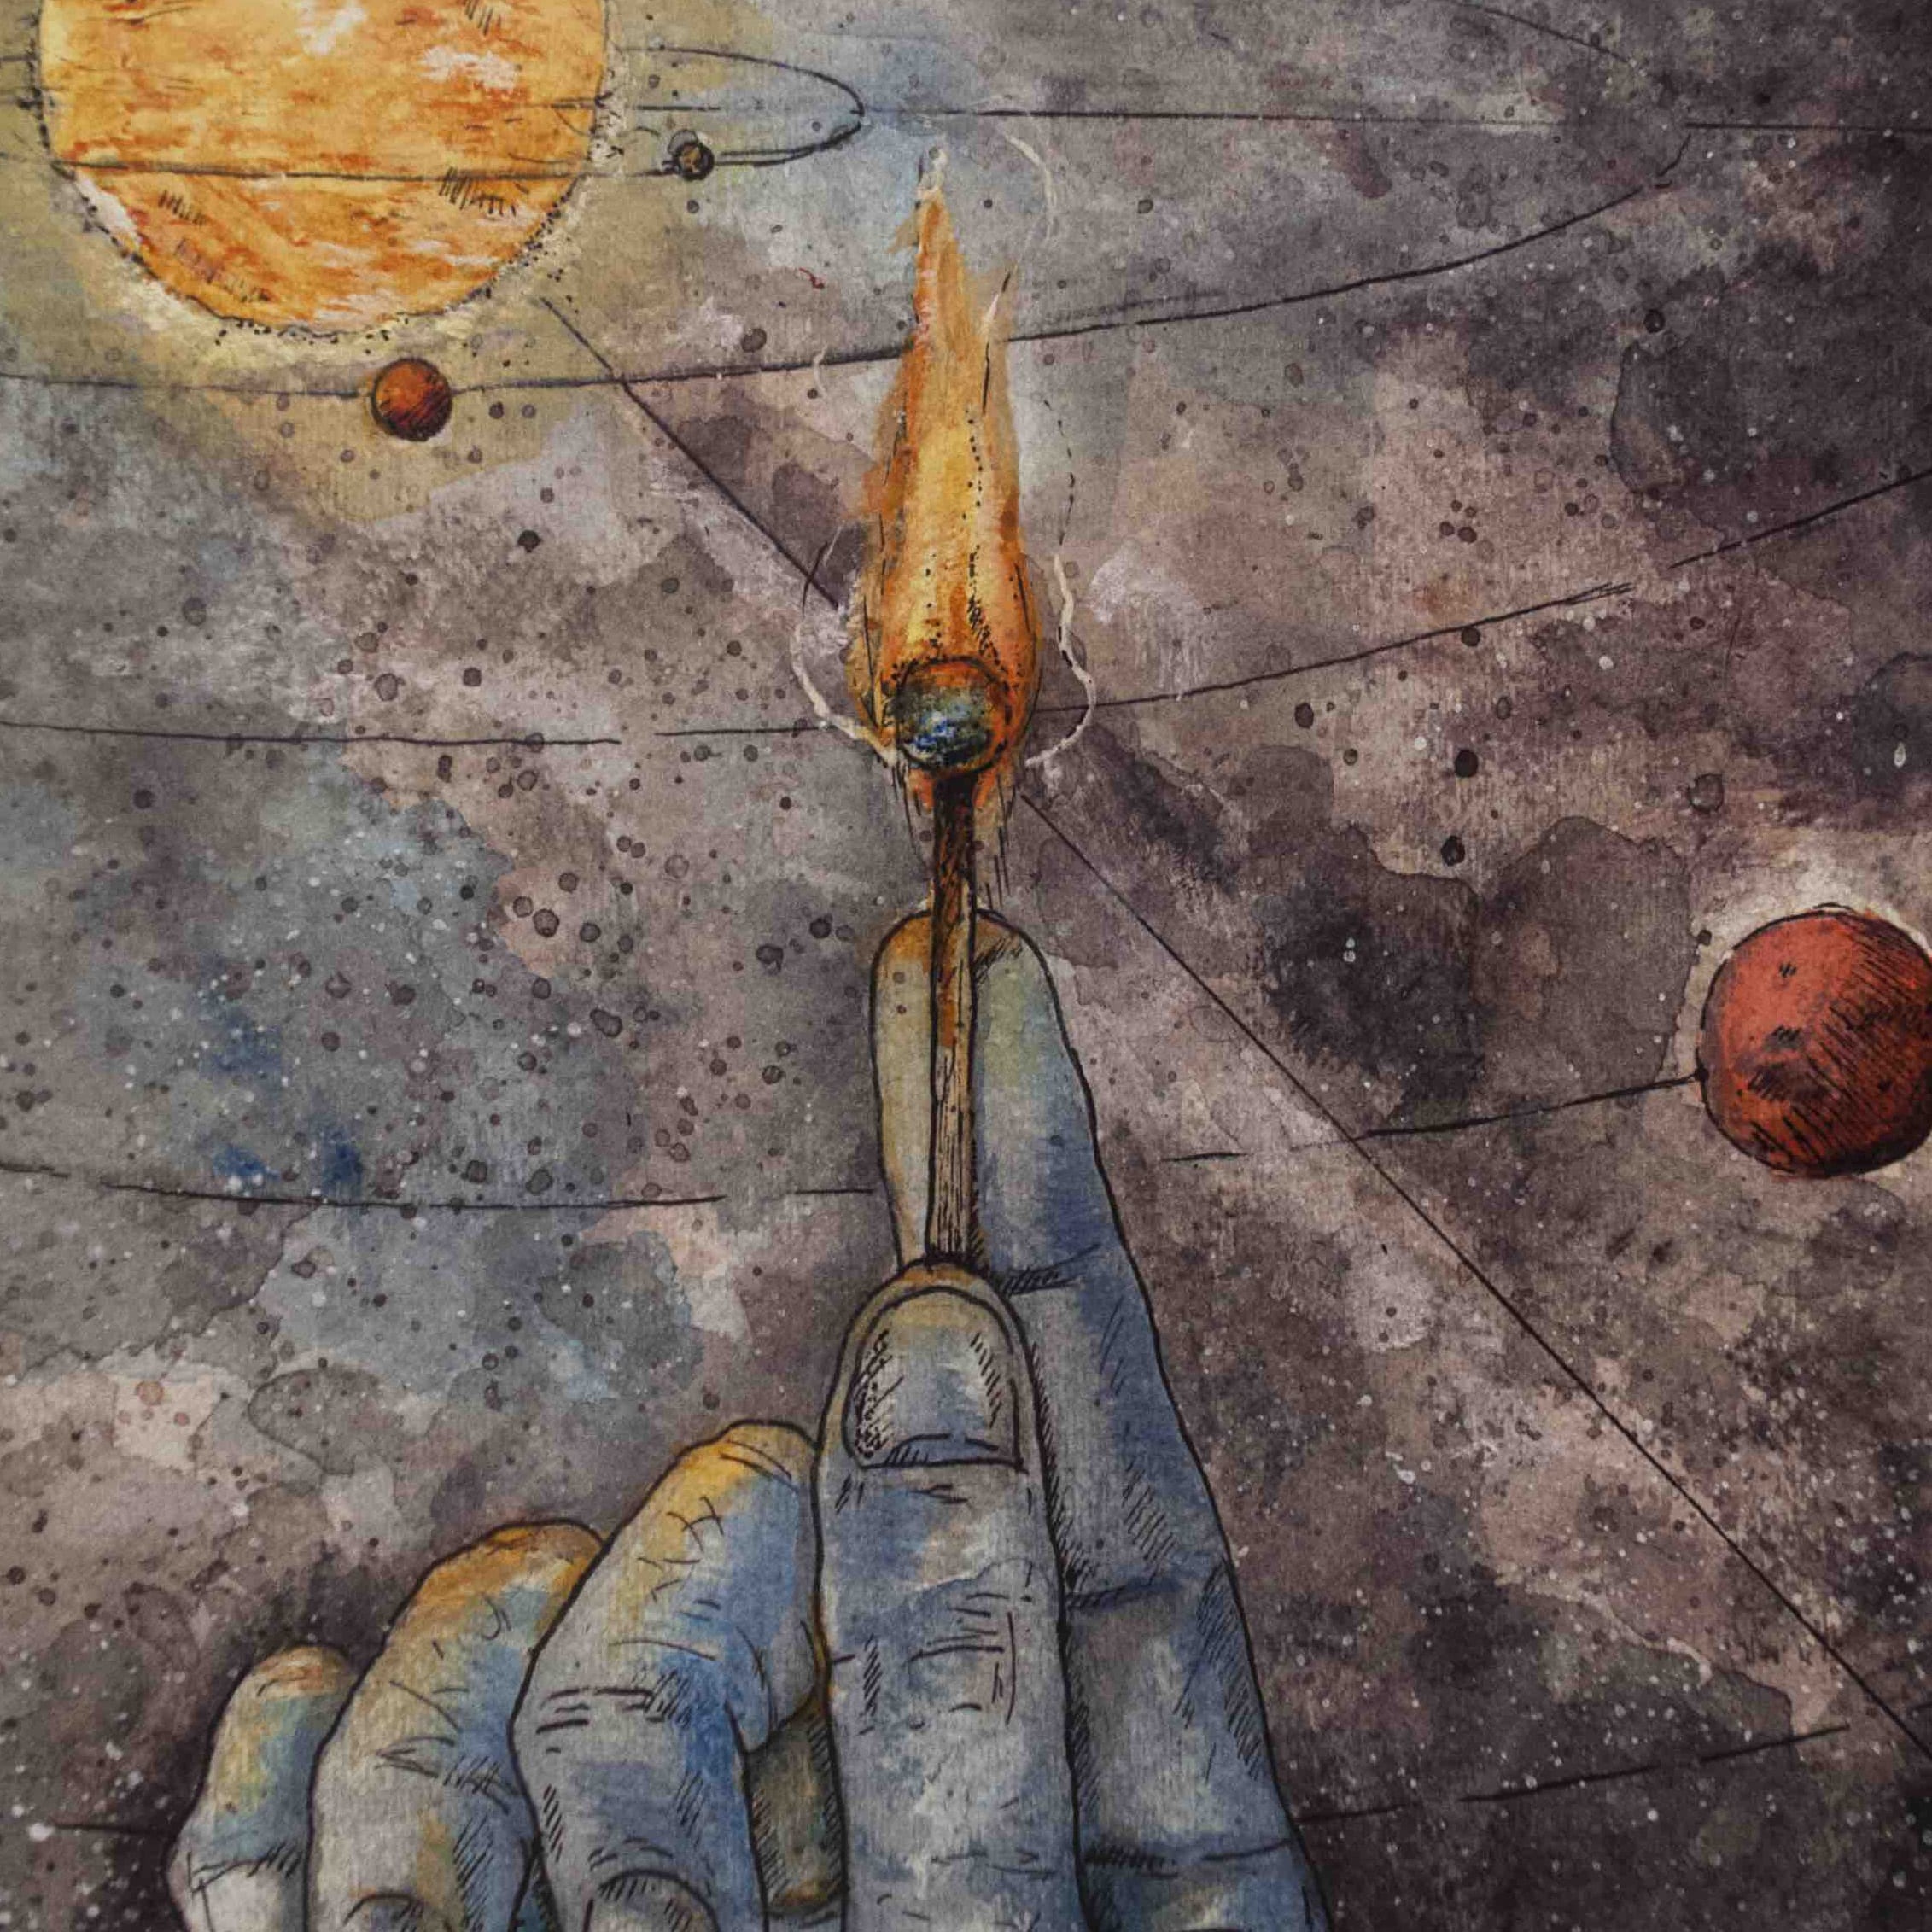 Student illustration showing hand holding a match with space in the background